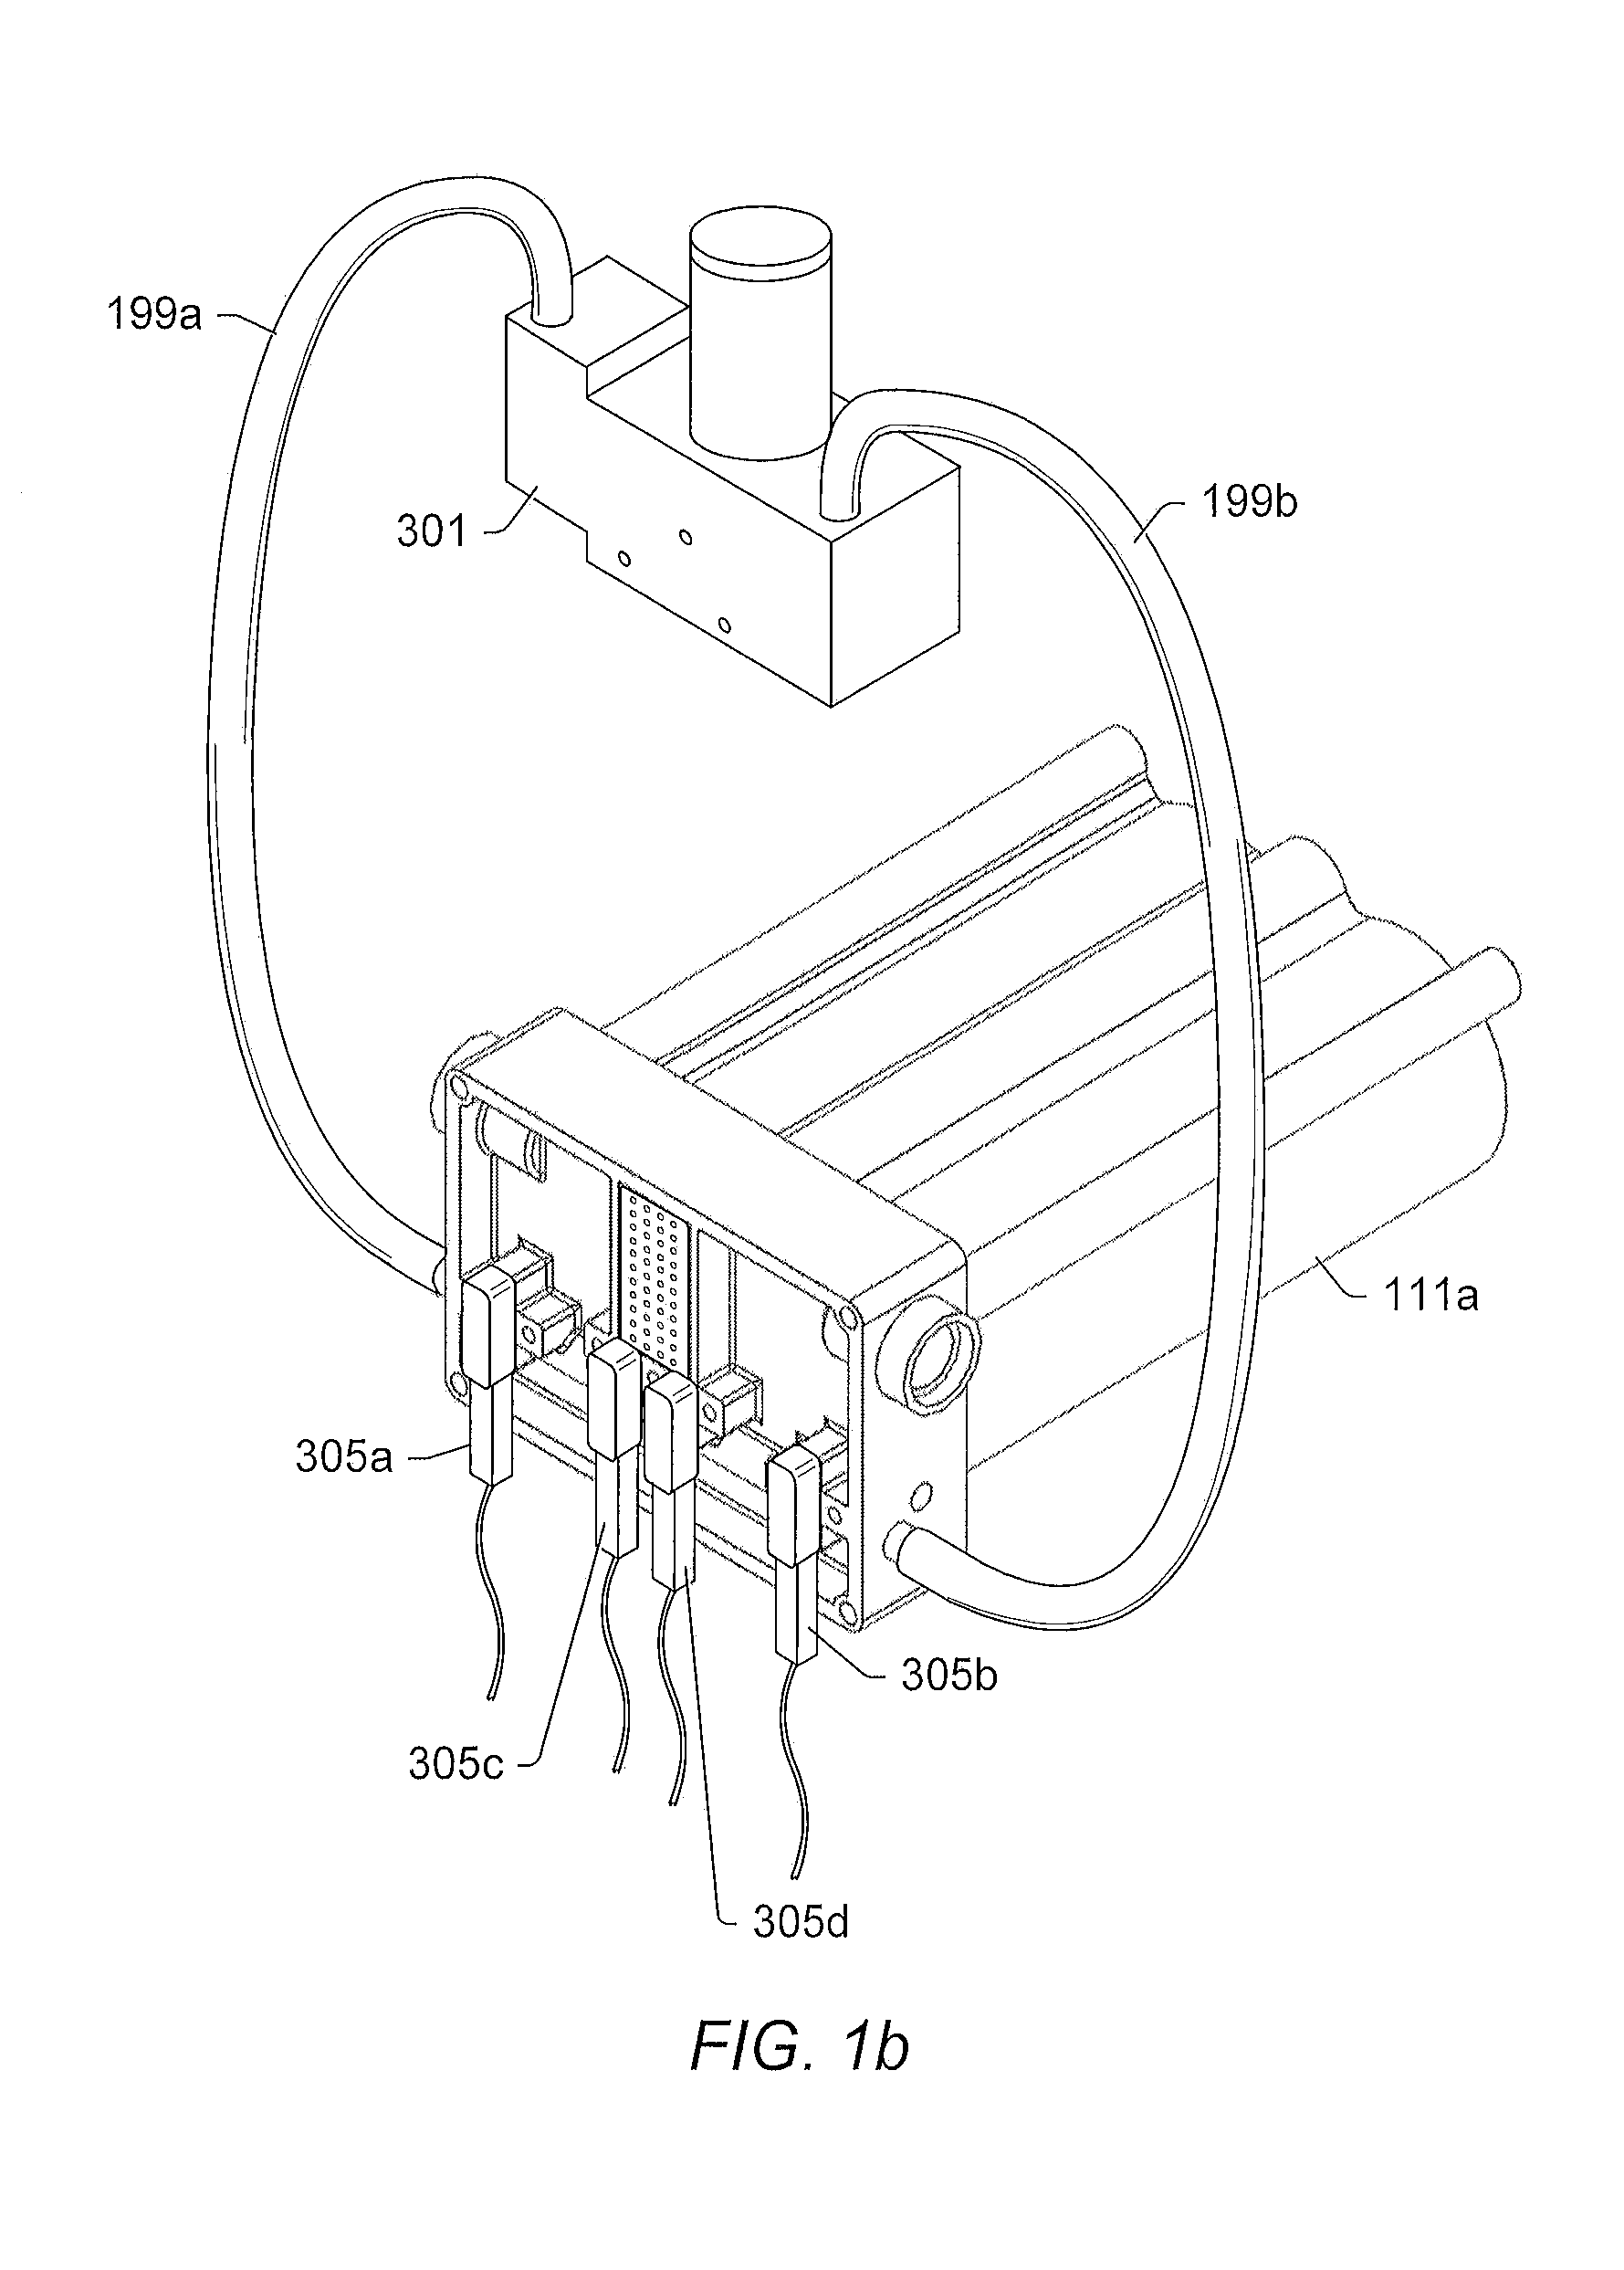 Oxygen concentrator apparatus and method having flow restricted coupling of the canisters